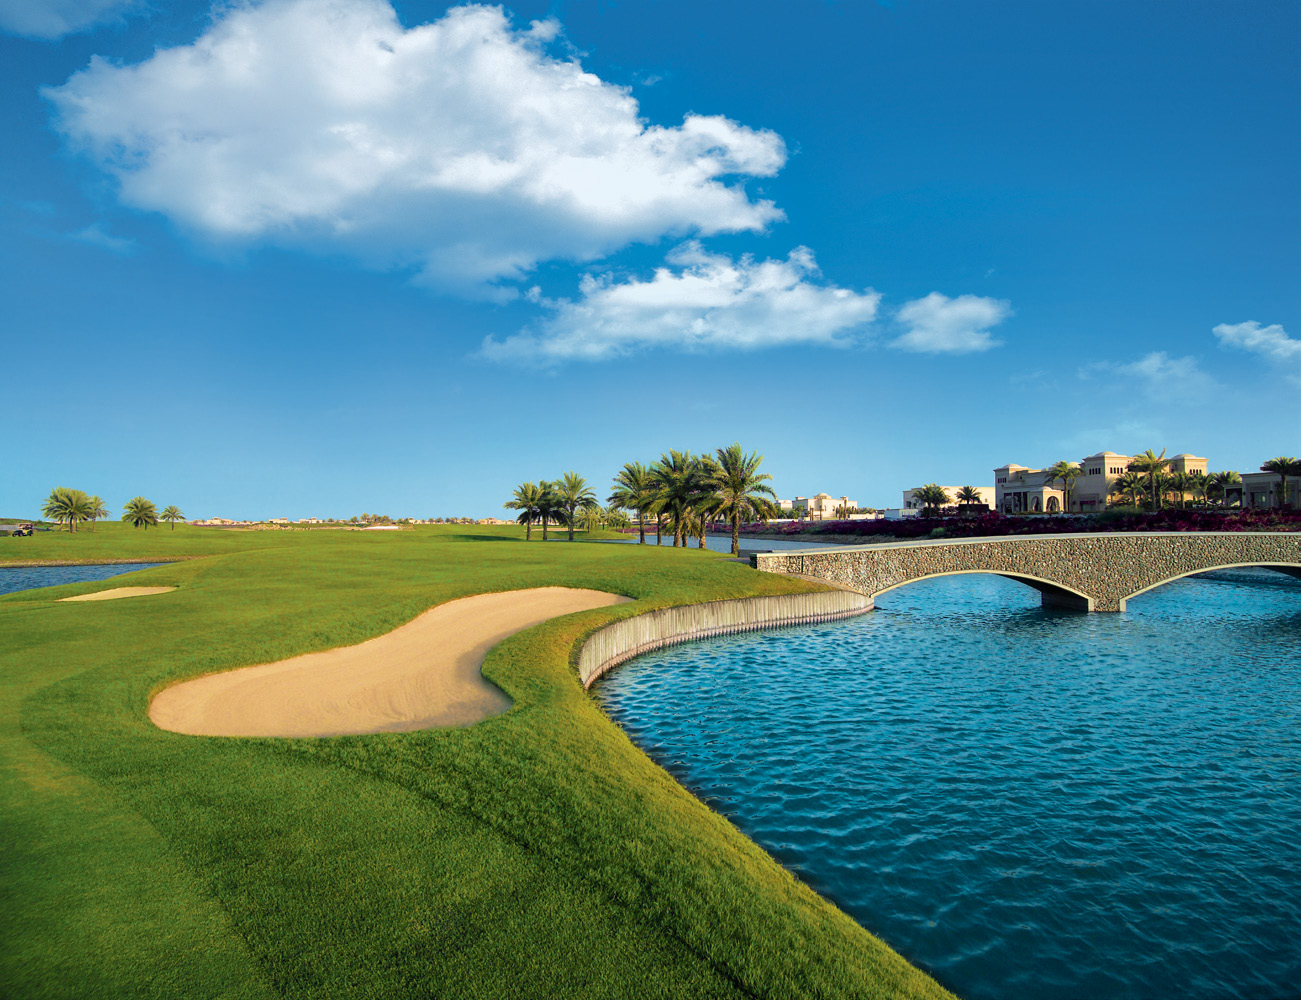 latest-project-in-dubai-golf-heights-for-sale-in-emirates-living